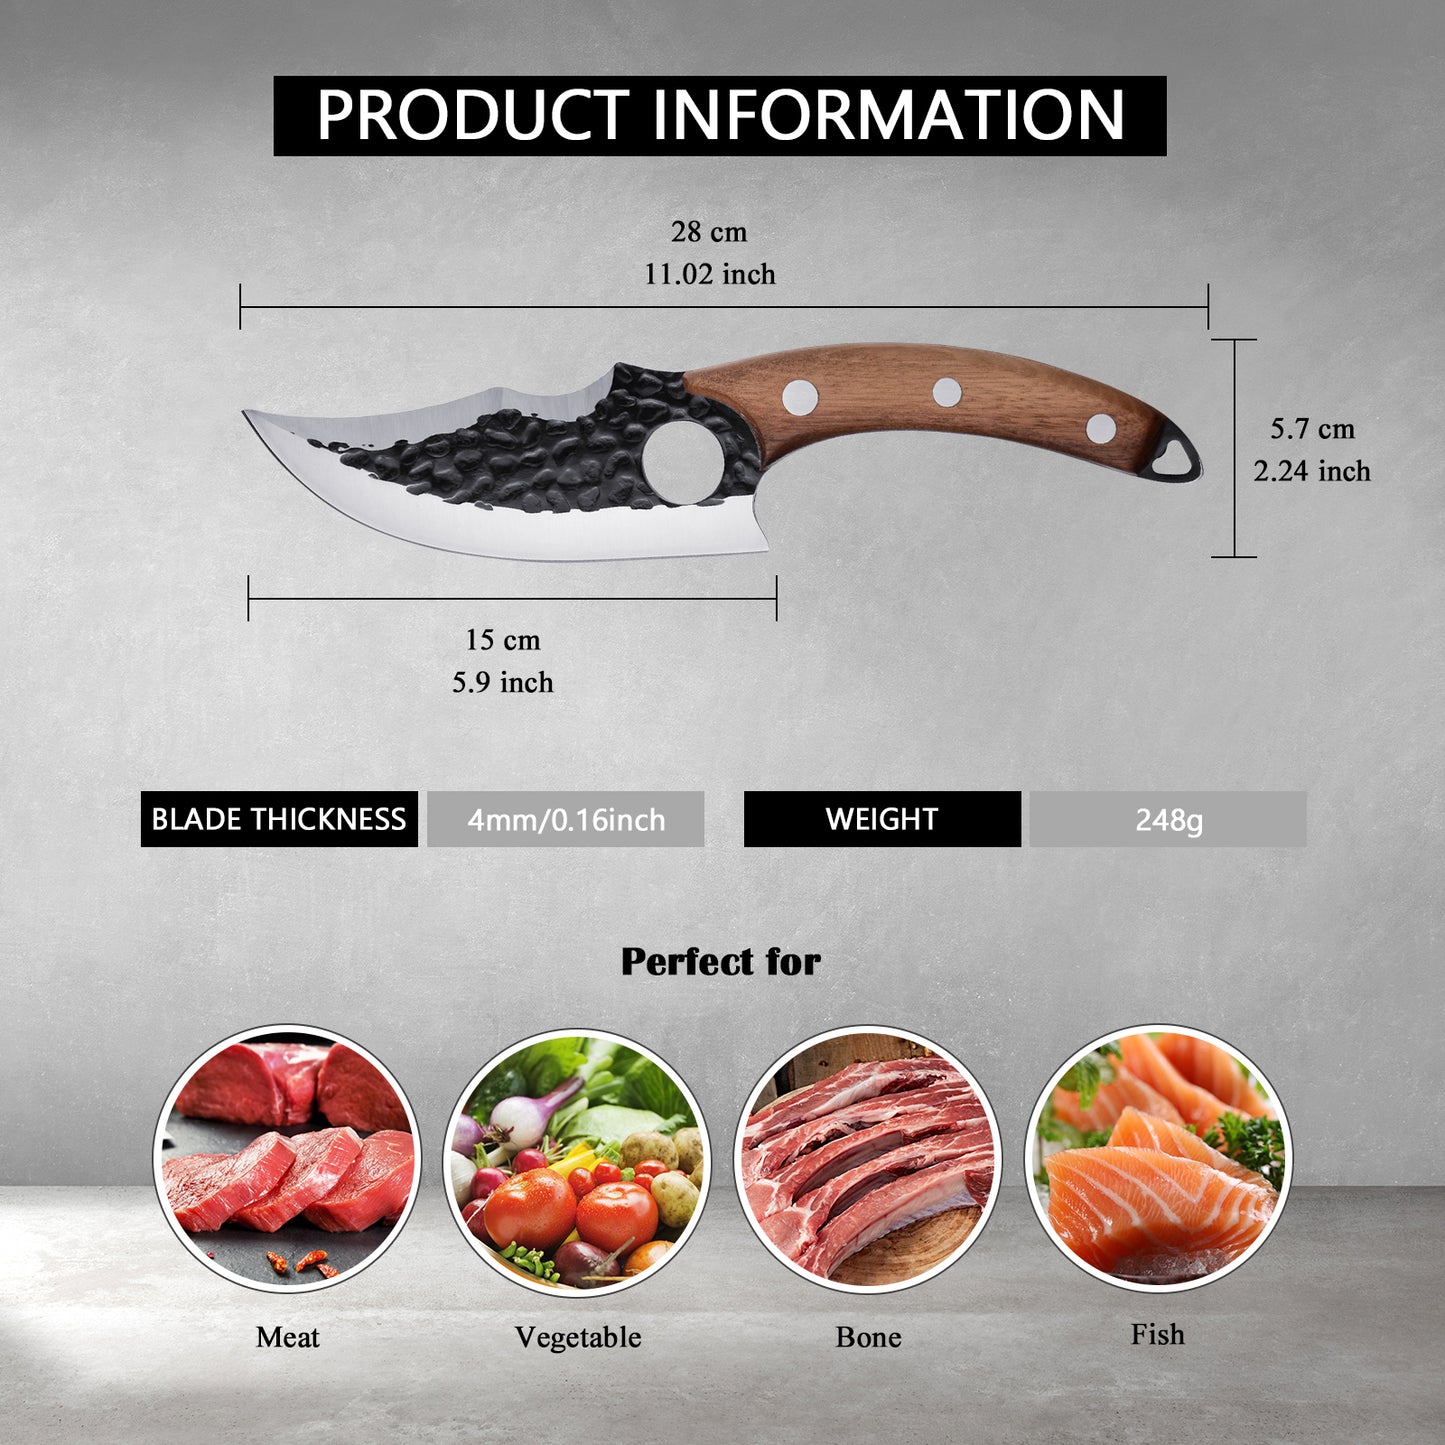 Kegani Viking Knife For Meat Cutting 6 Inch Meat Cleaver Boning Knife, High Carbon Steel Fillet Knife With Sheath For Kitchen And Outdoor Camping Gifts